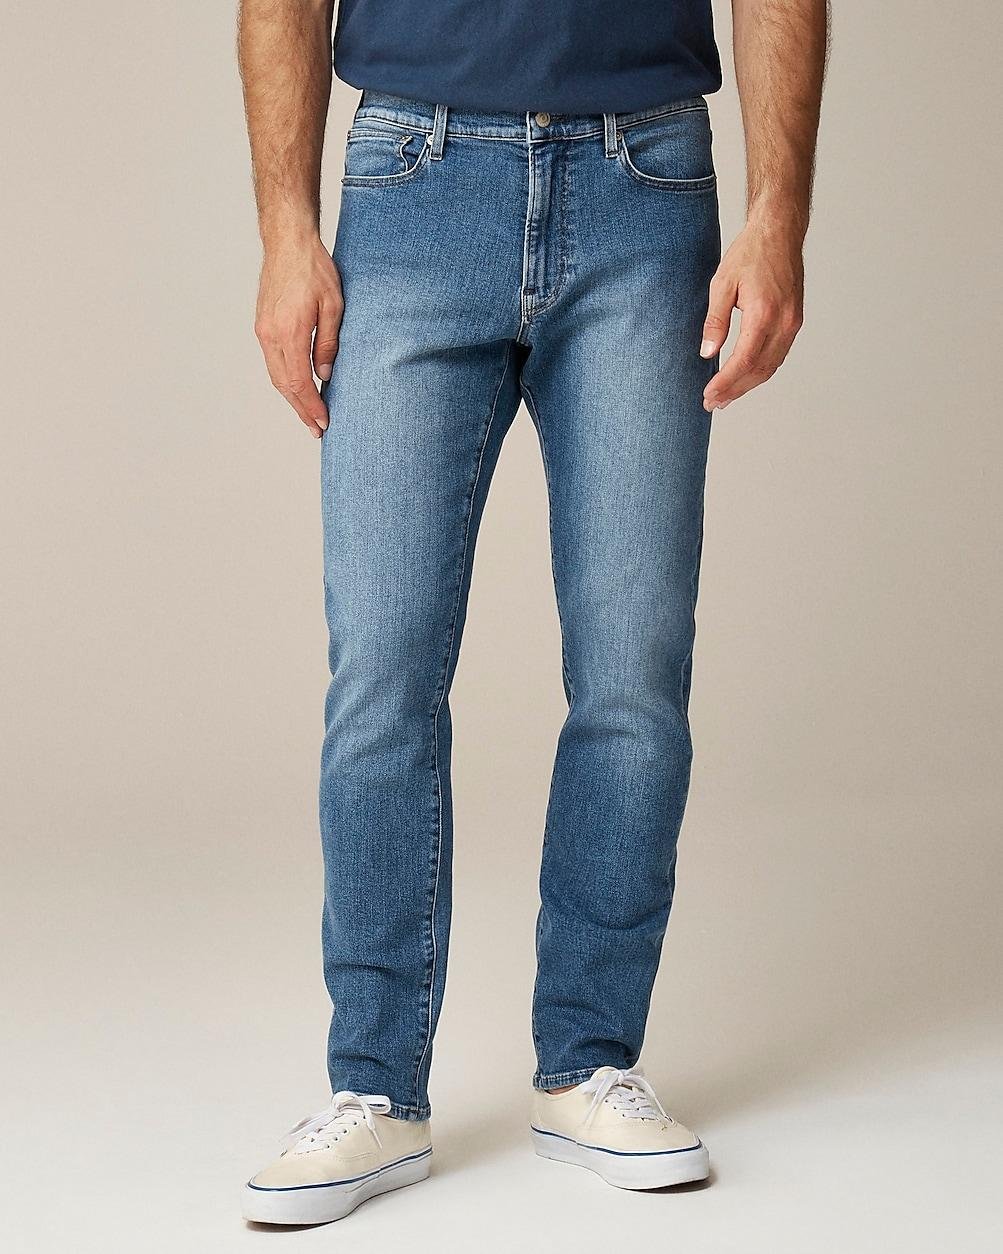 1040 Athletic Tapered-fit stretch jean in medium wash by J.CREW